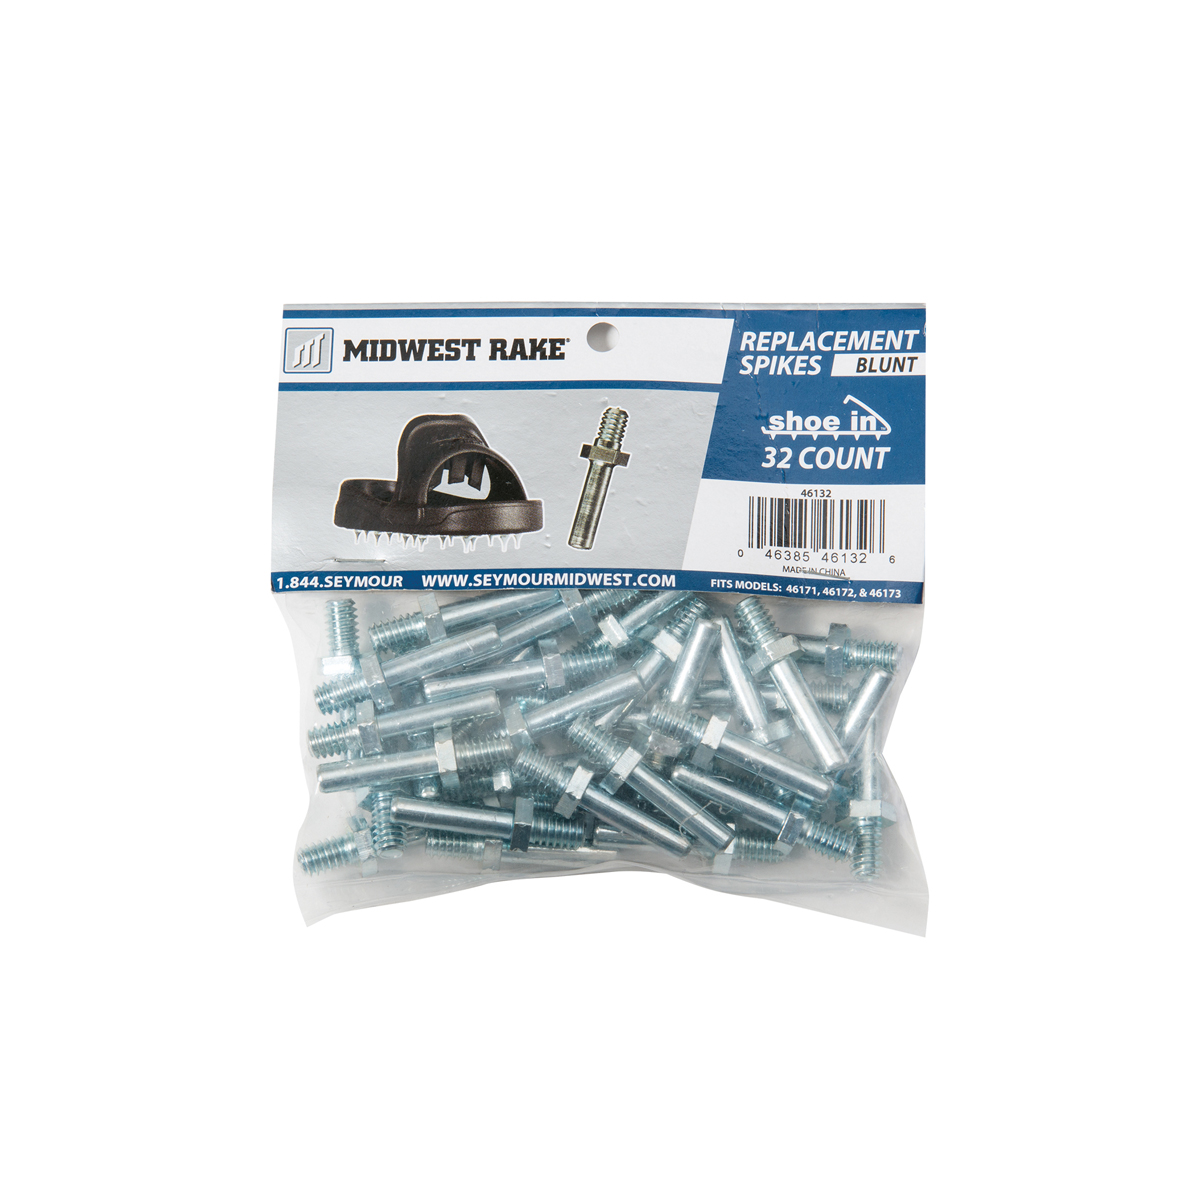 Seymour Midwest Replacement Spikes for Spike Shoes, 1" Blunt Spikes, 32 Count